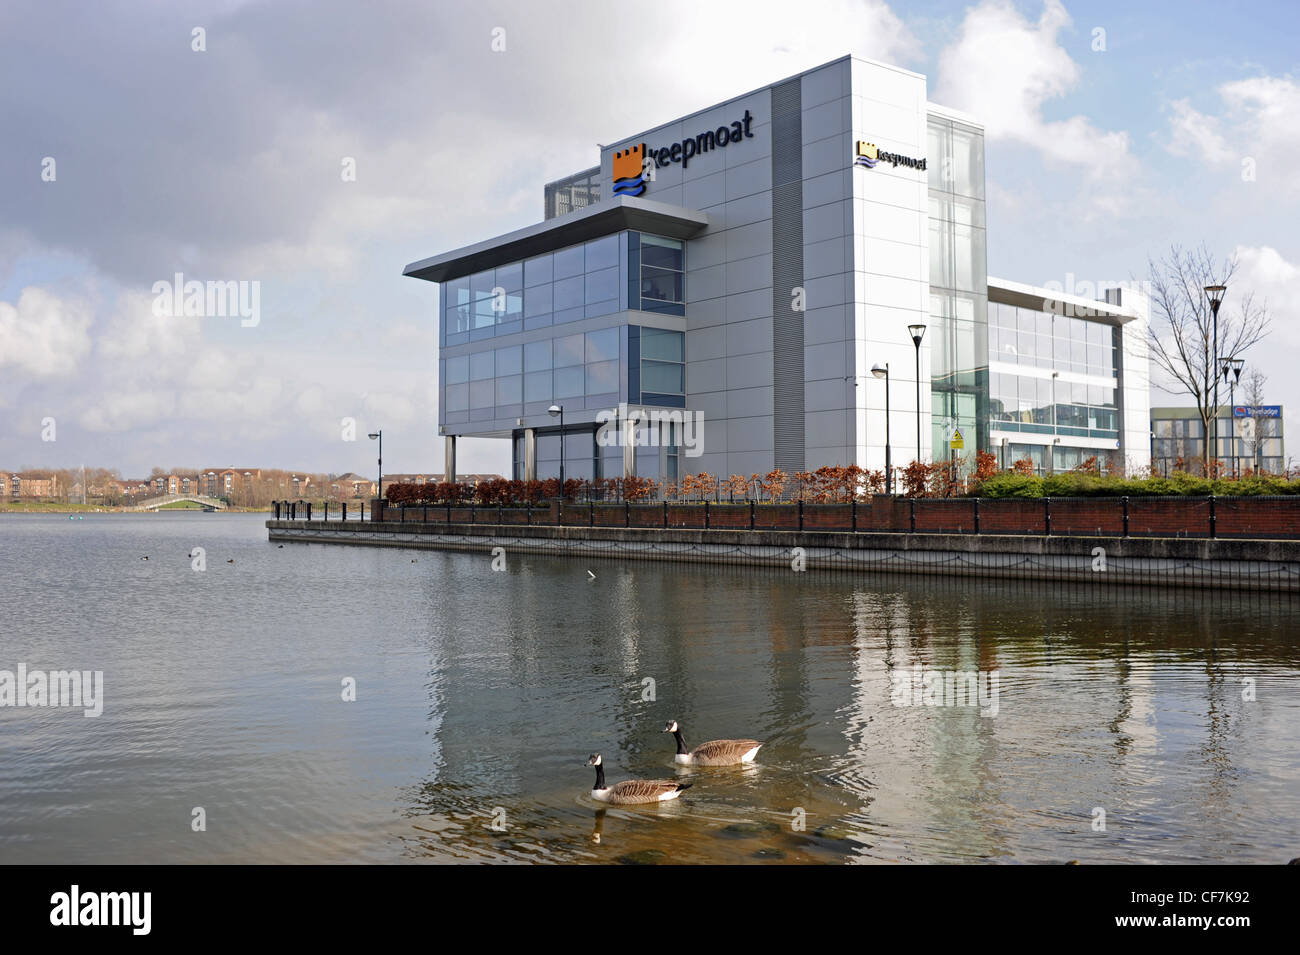 The Lakeside and Keepmoat man made Developement in Doncaster Yorkshire UK Stock Photo